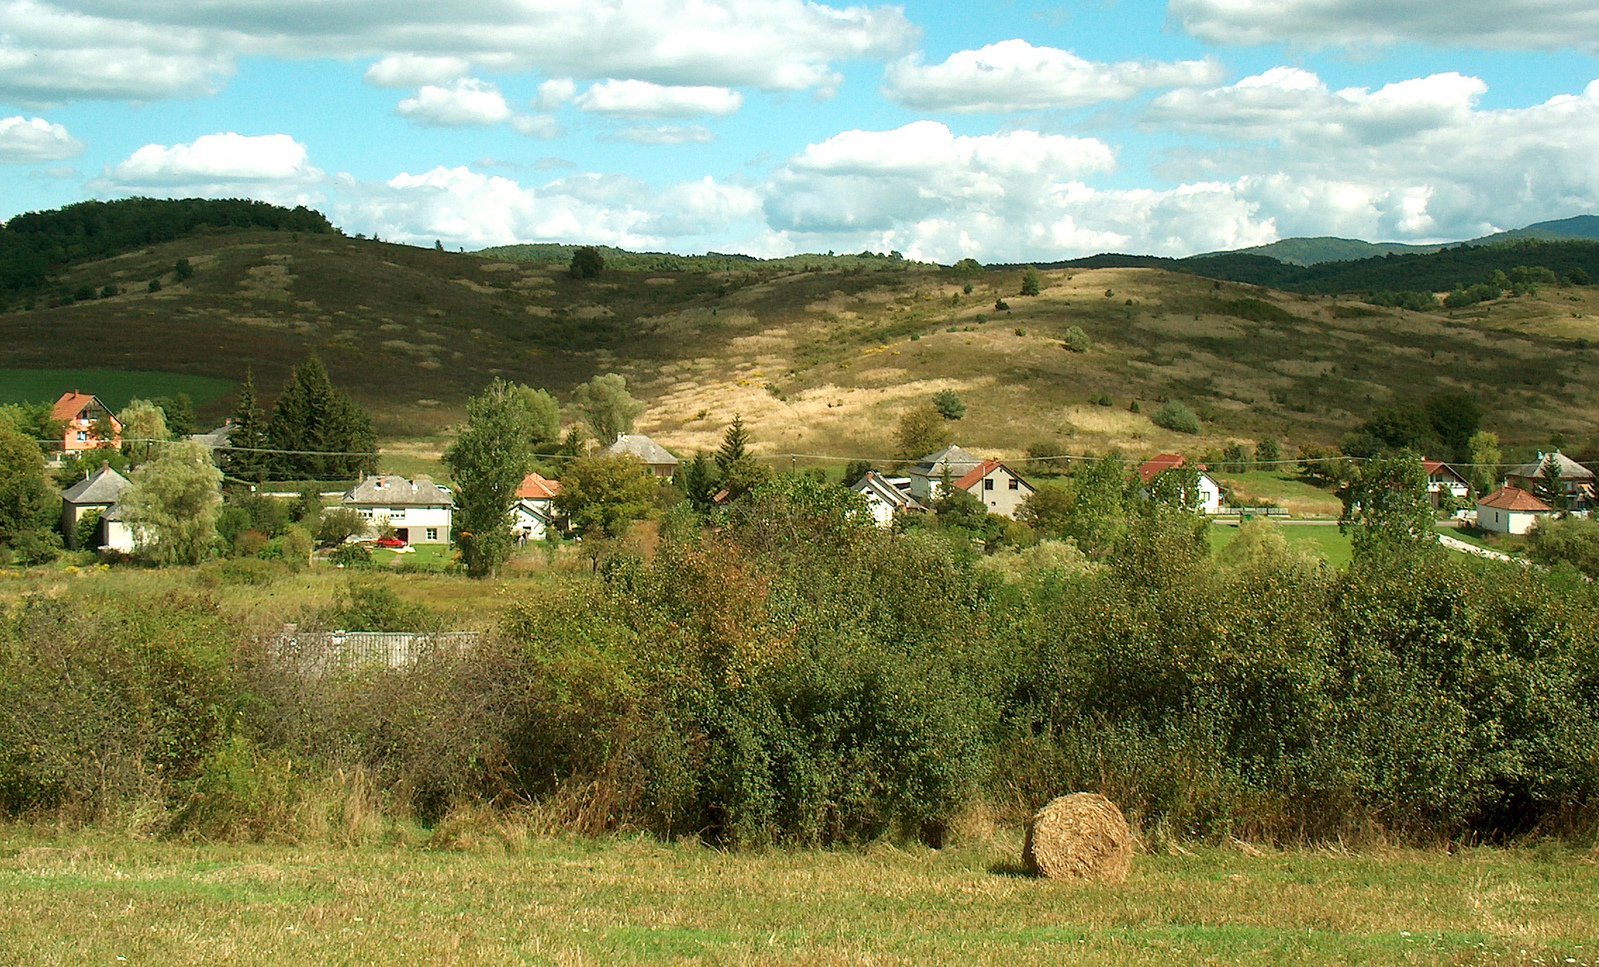 green grass and brown hills with houses in the background